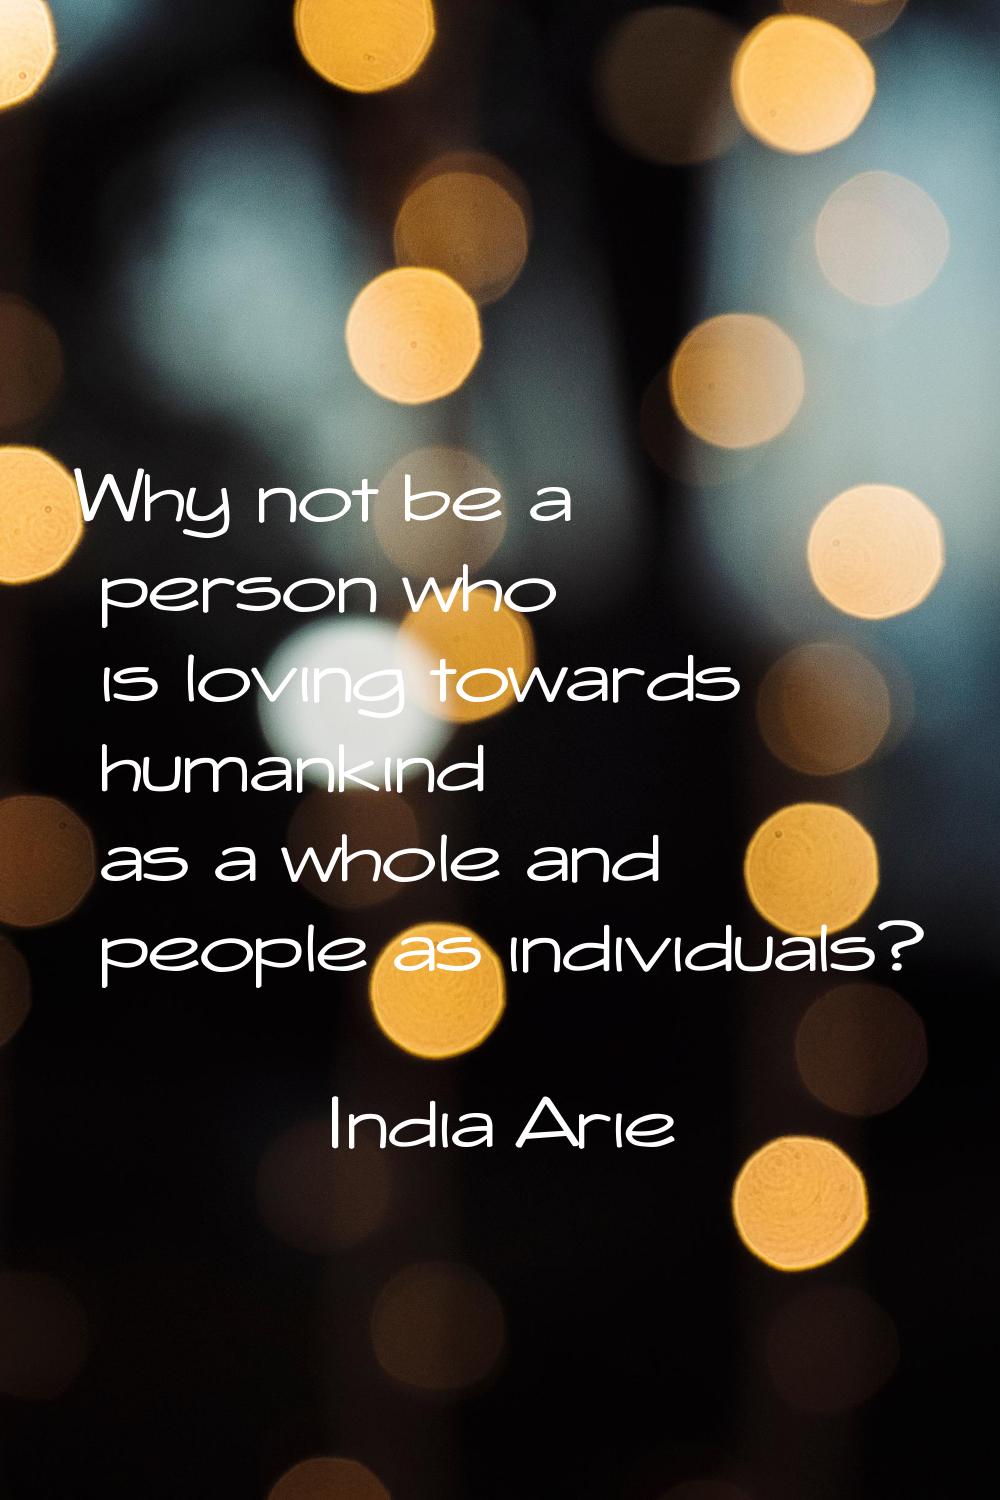 Why not be a person who is loving towards humankind as a whole and people as individuals?